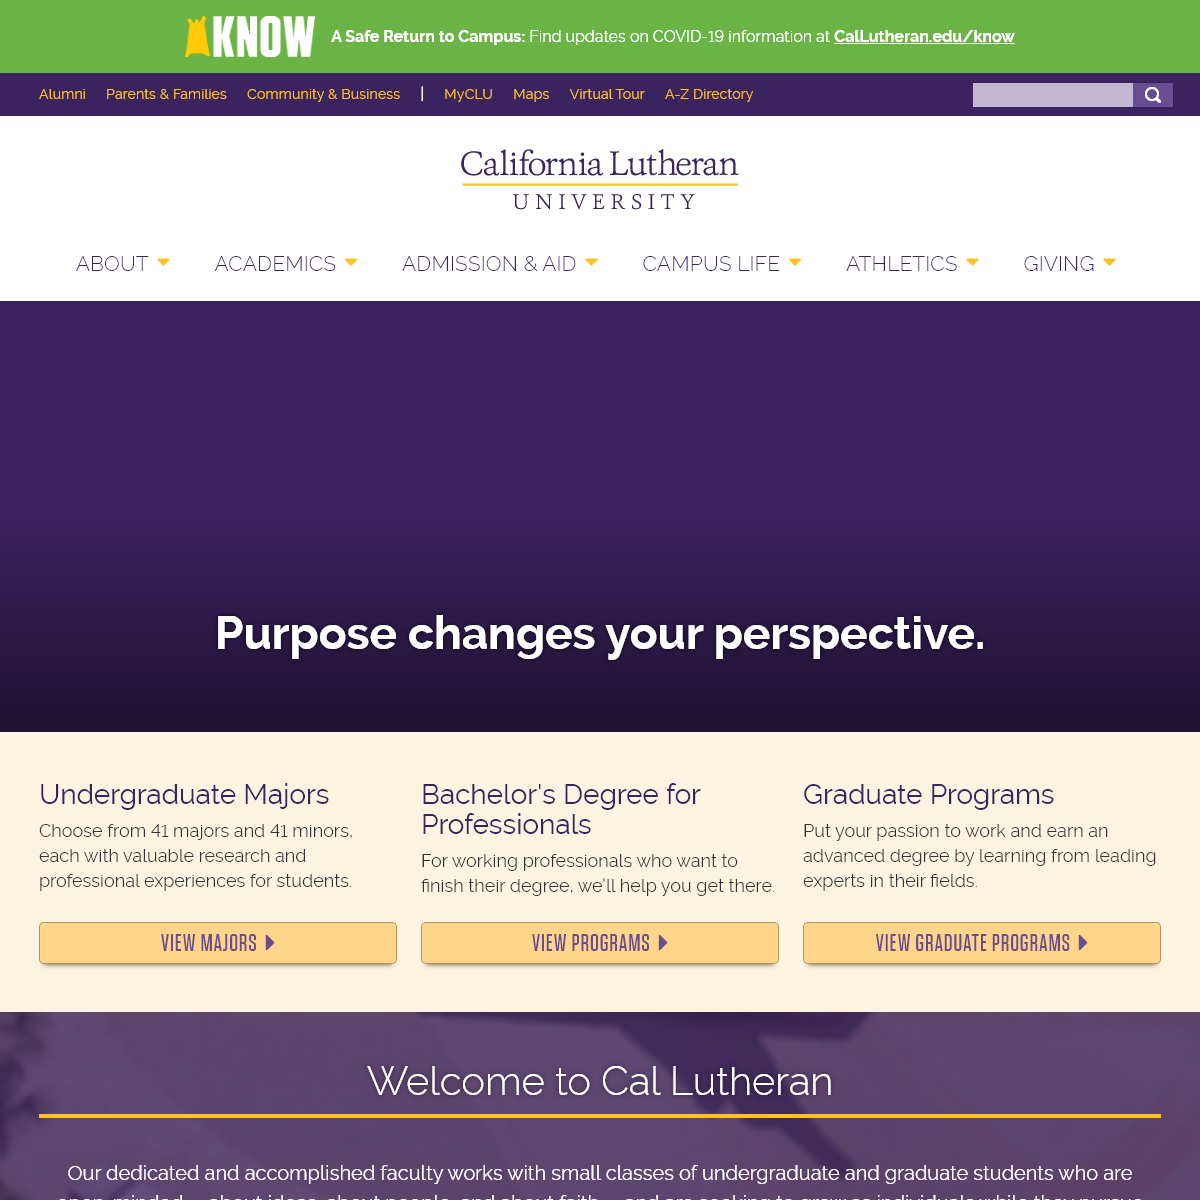 A complete backup of callutheran.edu